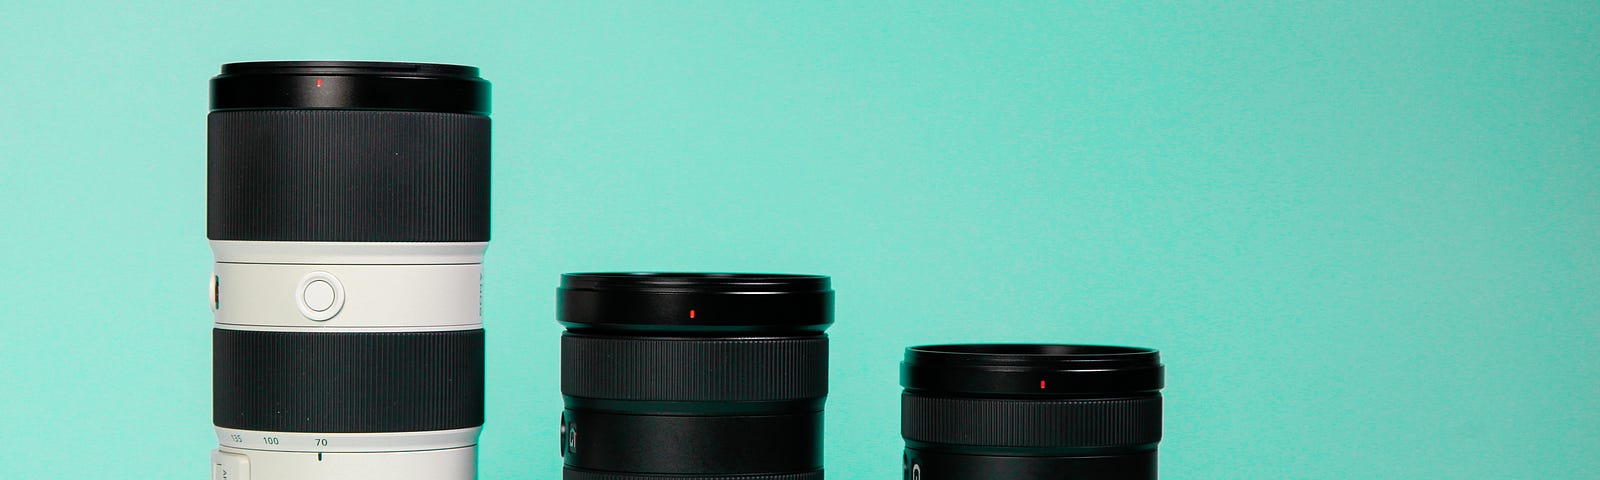 Four camera lenses lined up from left to right on a blue background